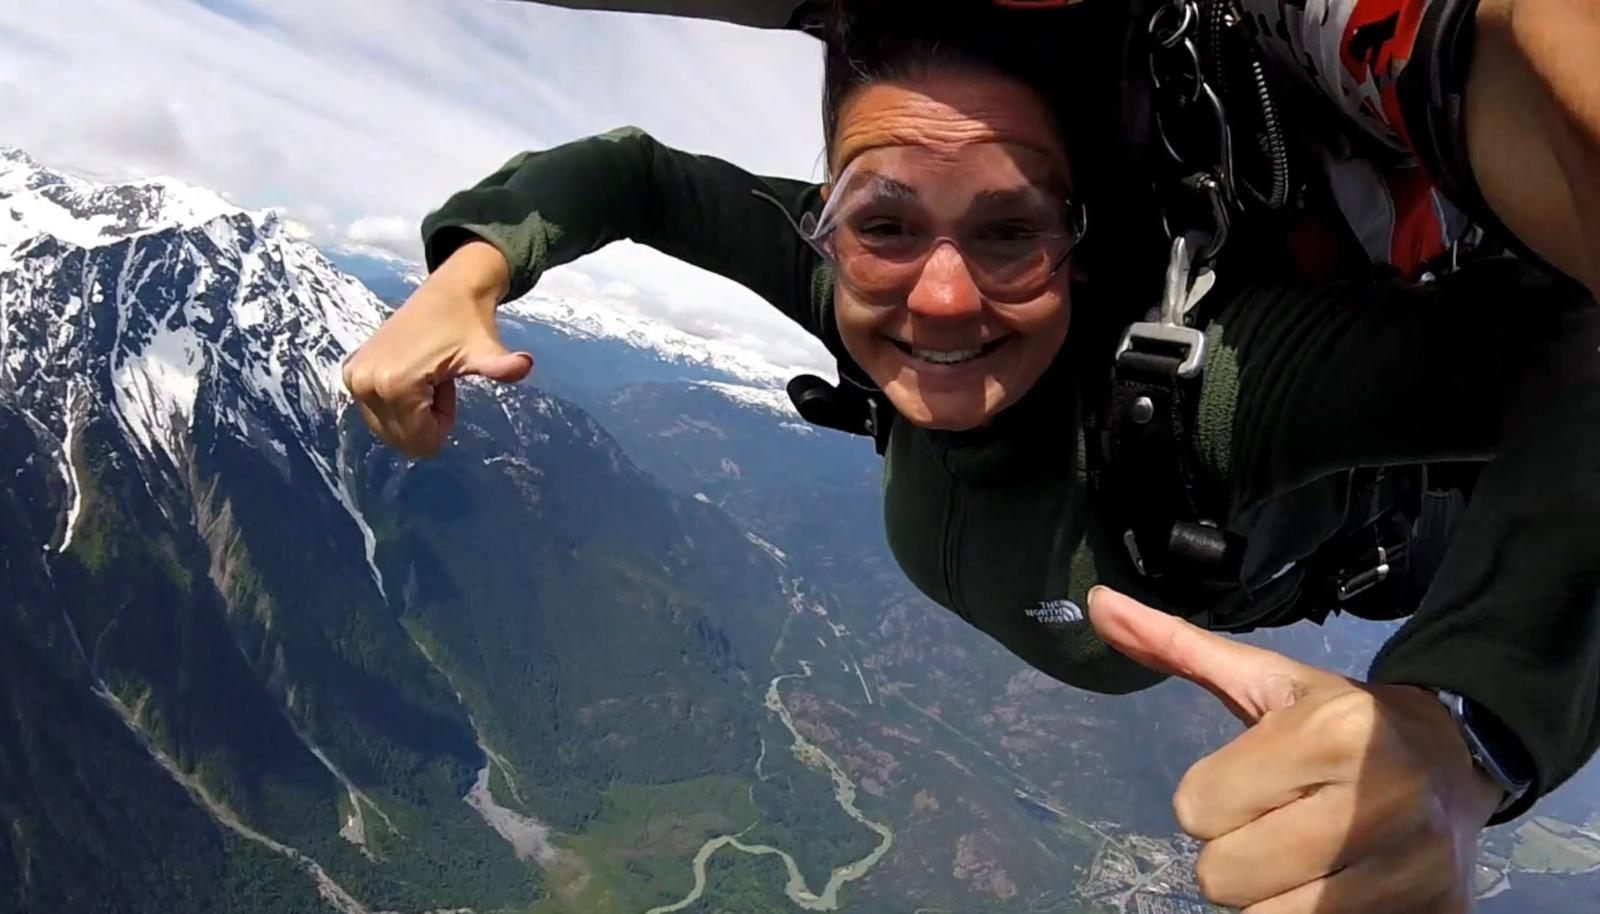 Dani Dillon skydiving, she is looking at the camera wearing goggles and smiling holding two thumbs up